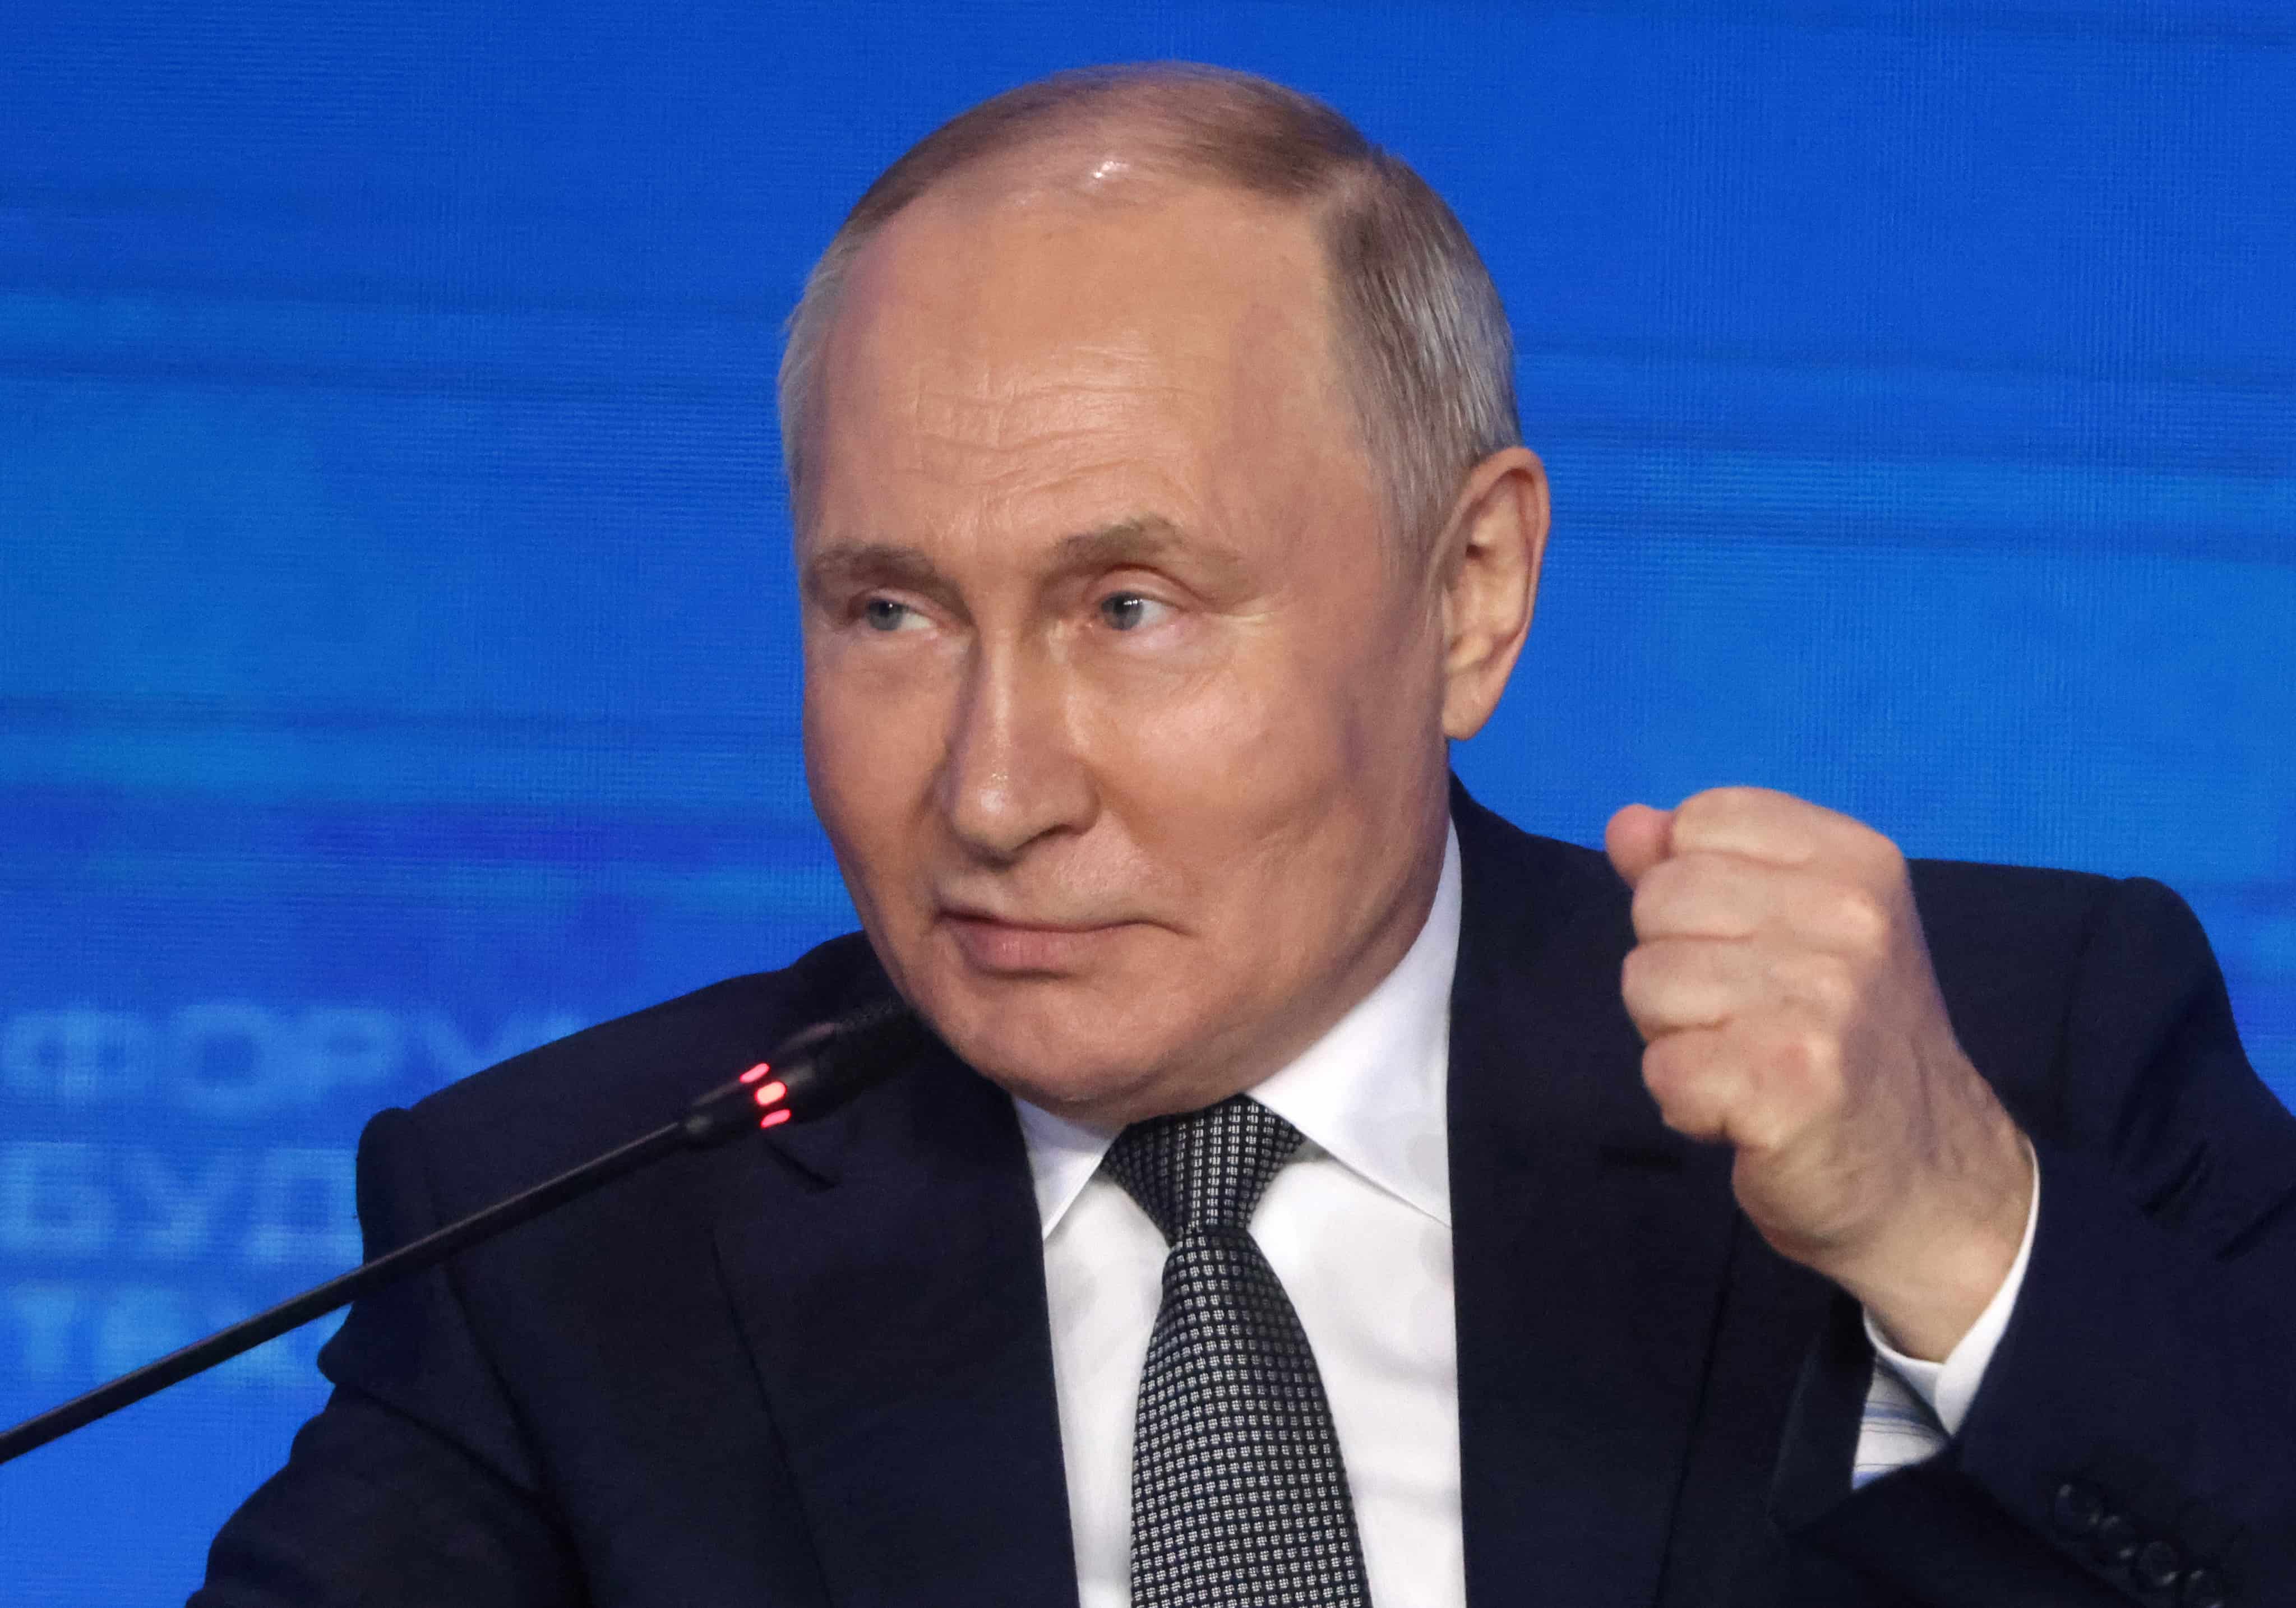 Putin Claims Russia Close to Creating Cancer Vaccines